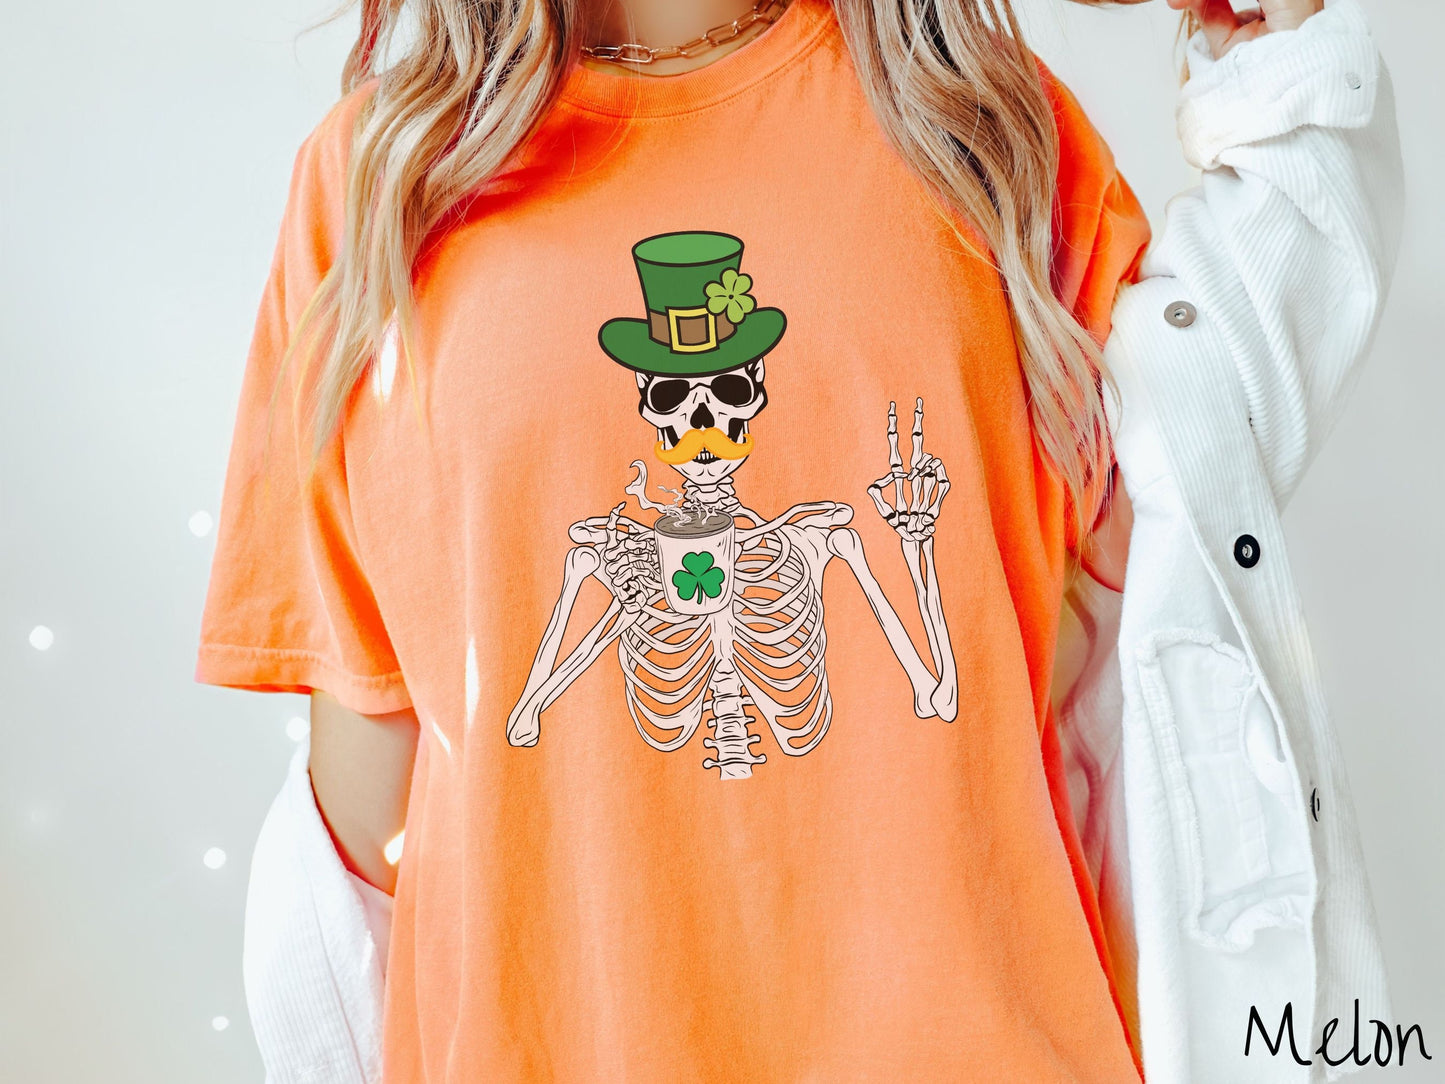 A woman wearing a vintage, melon colored shirt with a skeleton wearing a green top hat with a green clover and an orange mustache showing the peace sign with its left hand and drinking out of a steaming hot coffee cup with a three leaf clover on it.